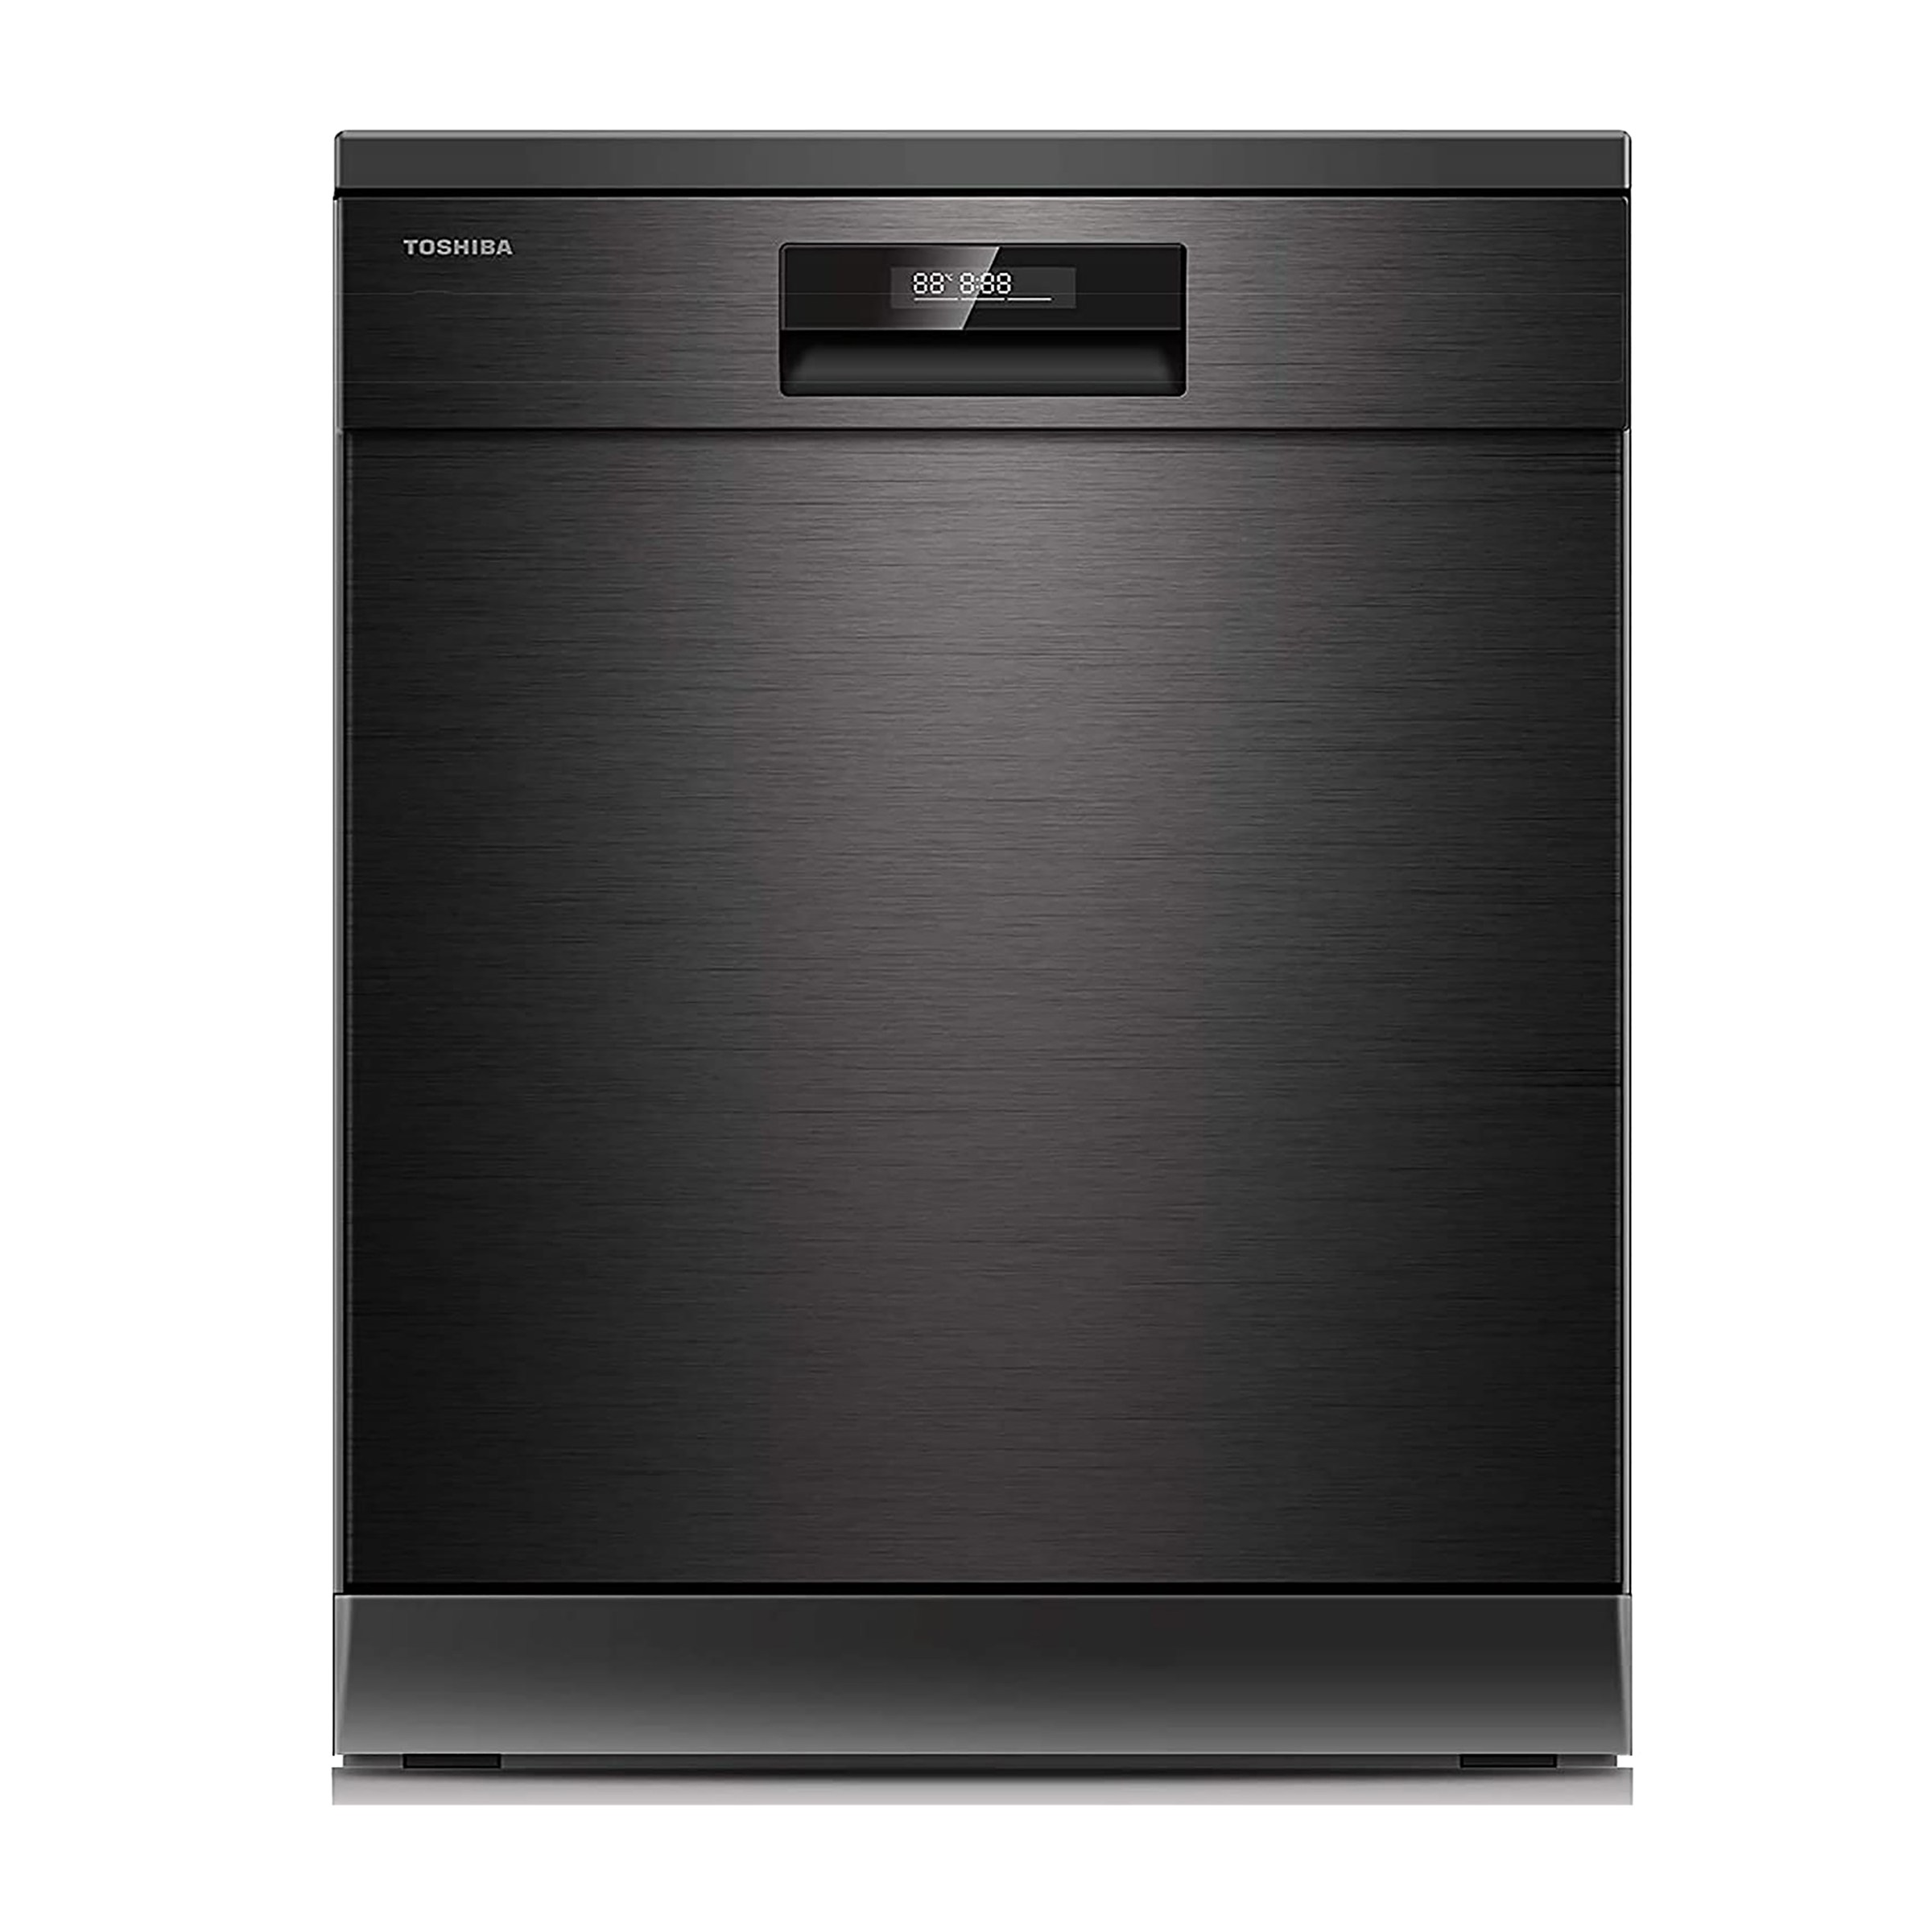 Toshiba 15 Place Setting Freestanding Dishwasher (Antibacterial Filter, DW-15F2(BS)-IN, Black)_1